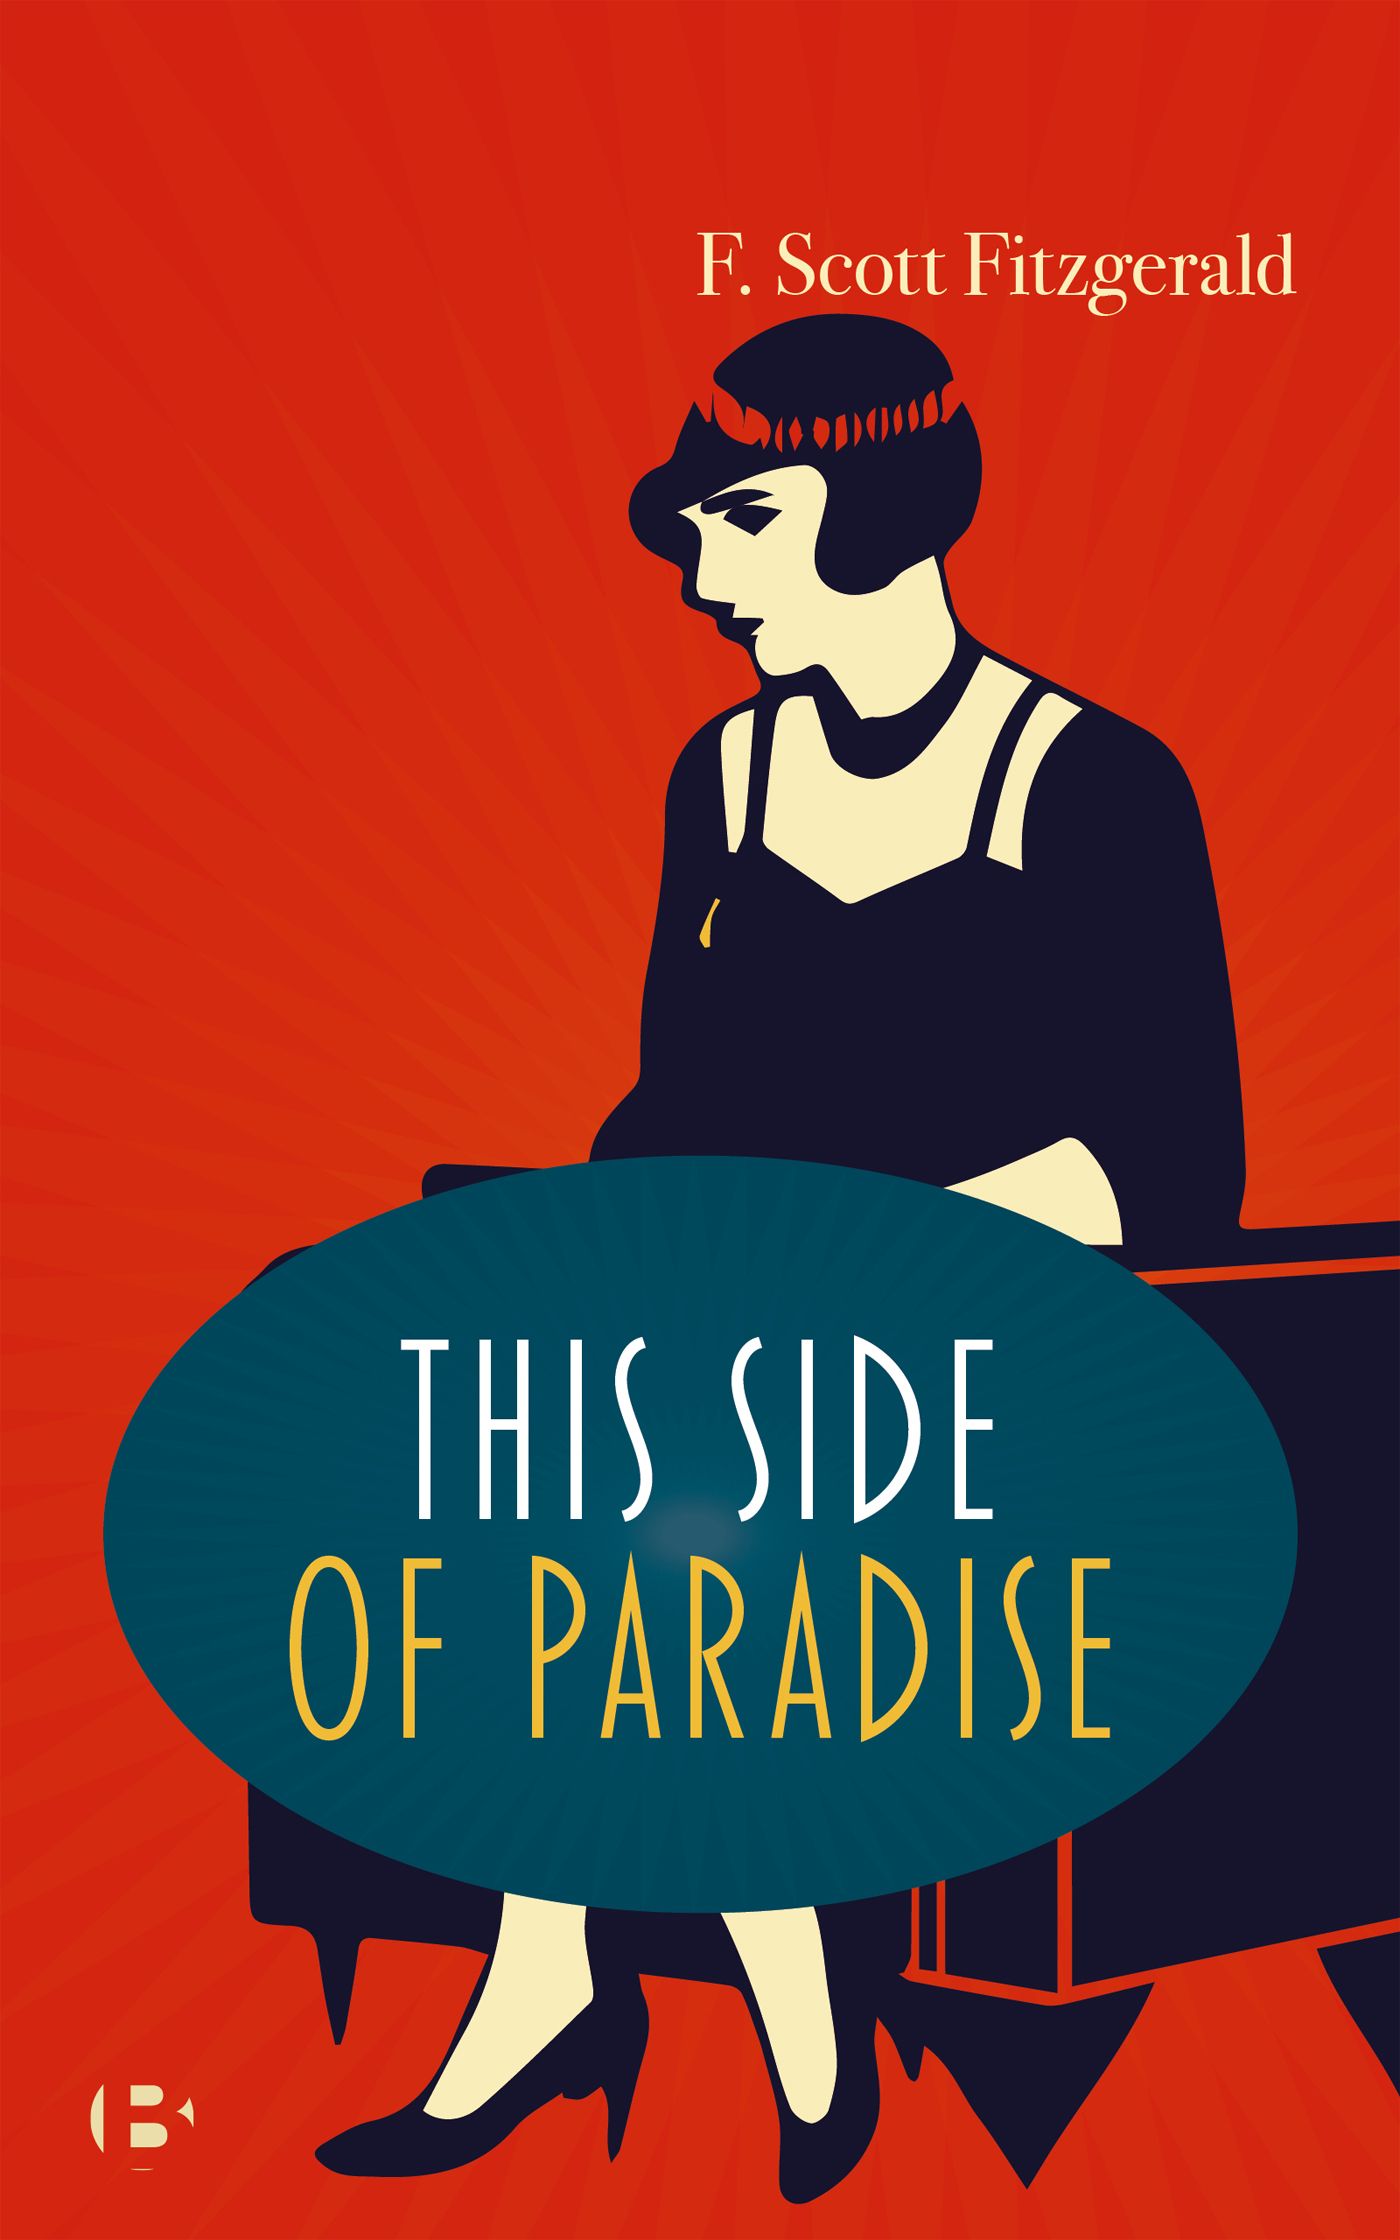 This Side of Paradise, eBook by F. Scott Fitzgerald